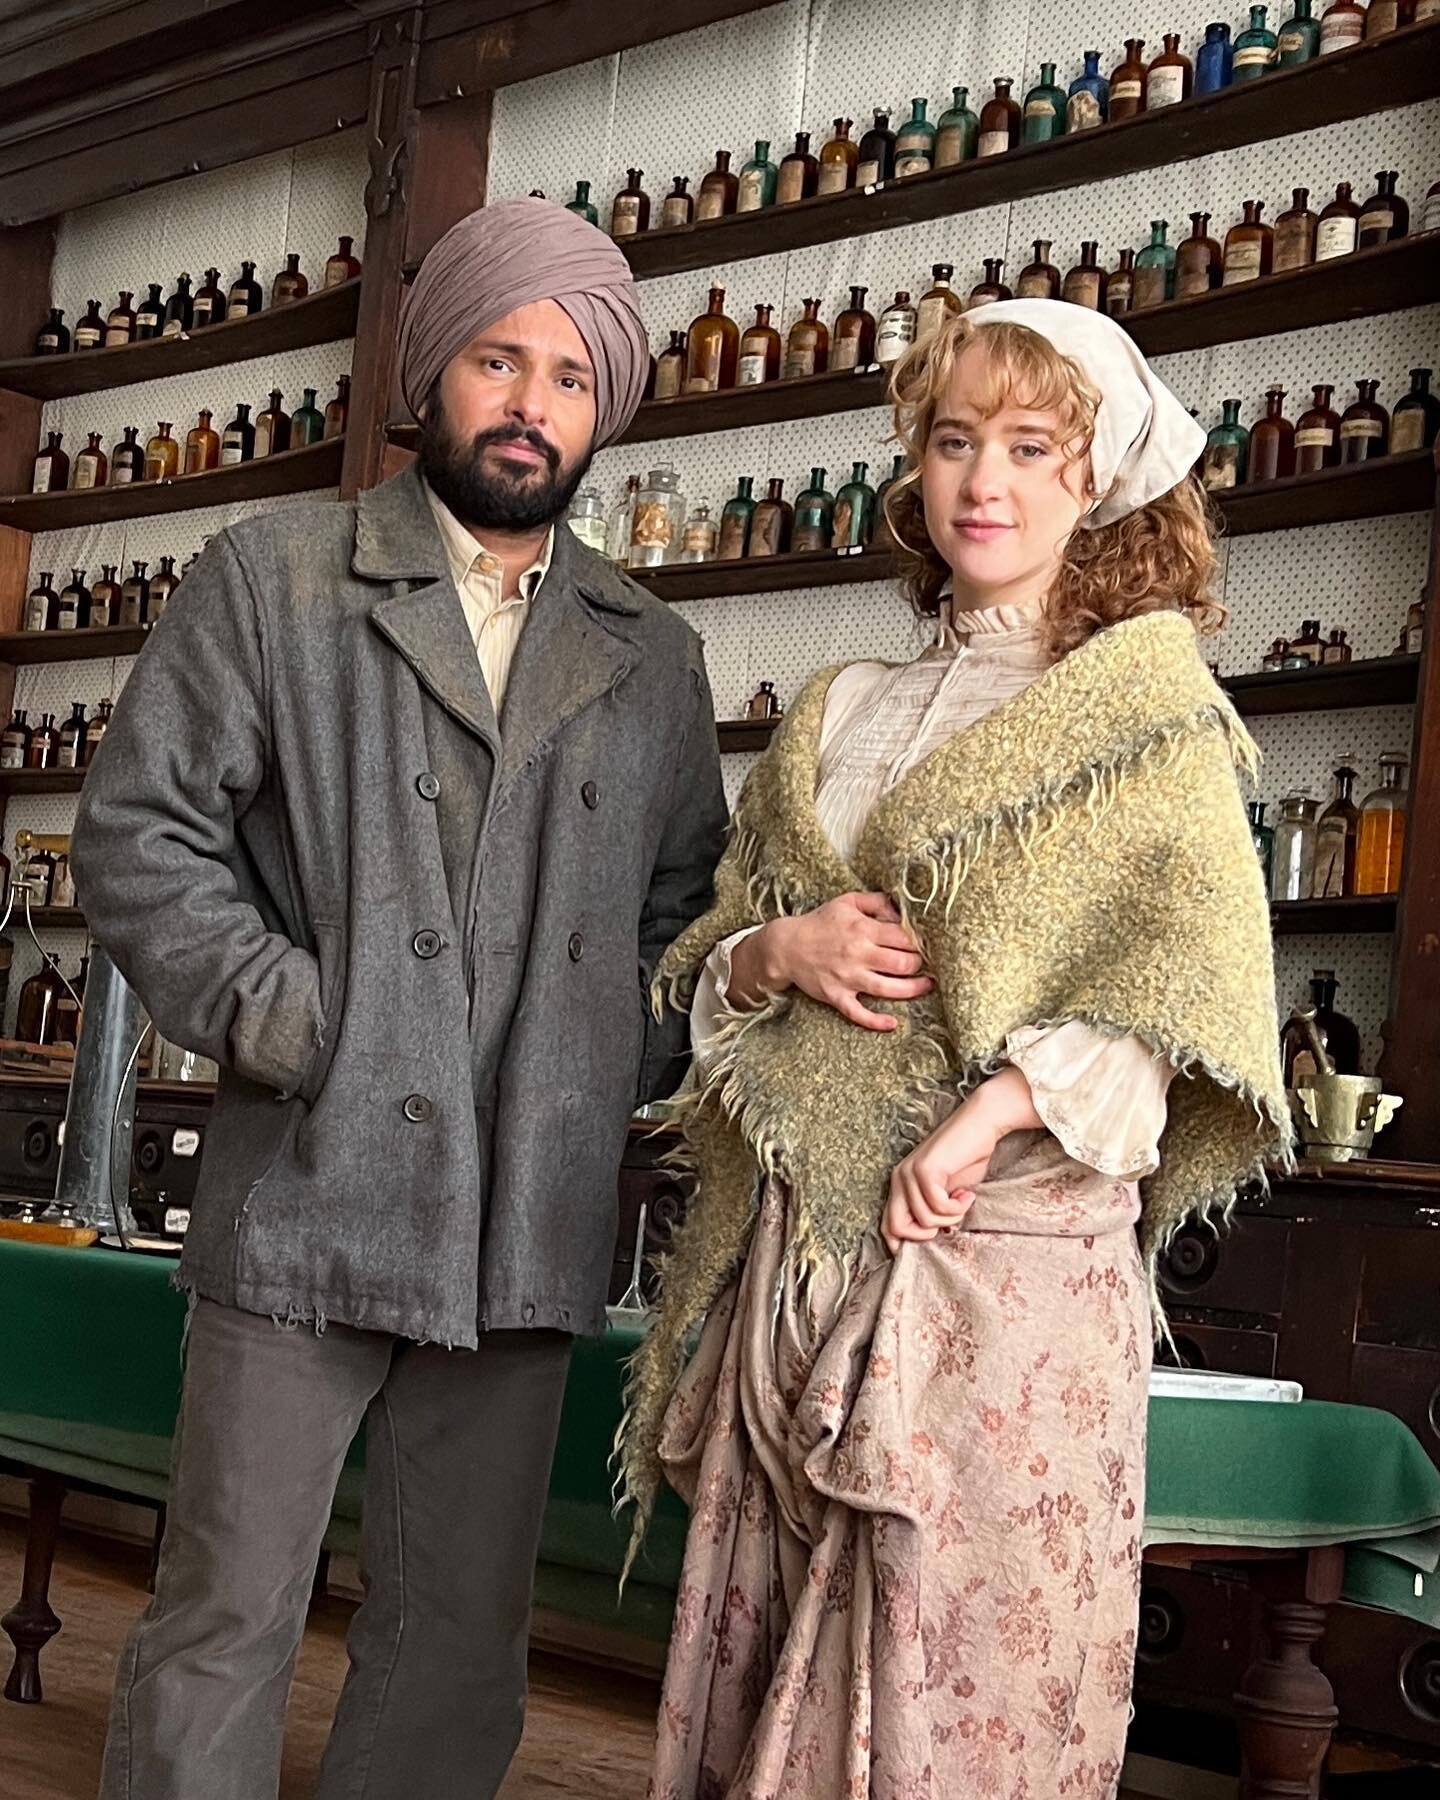 Chhalla and Bella 🌟 in honor of CMKNA&rsquo;s first week in cinemas 🌟 

With @amrindergill on set in the Barkerville Pharmacy #museum #artifacts